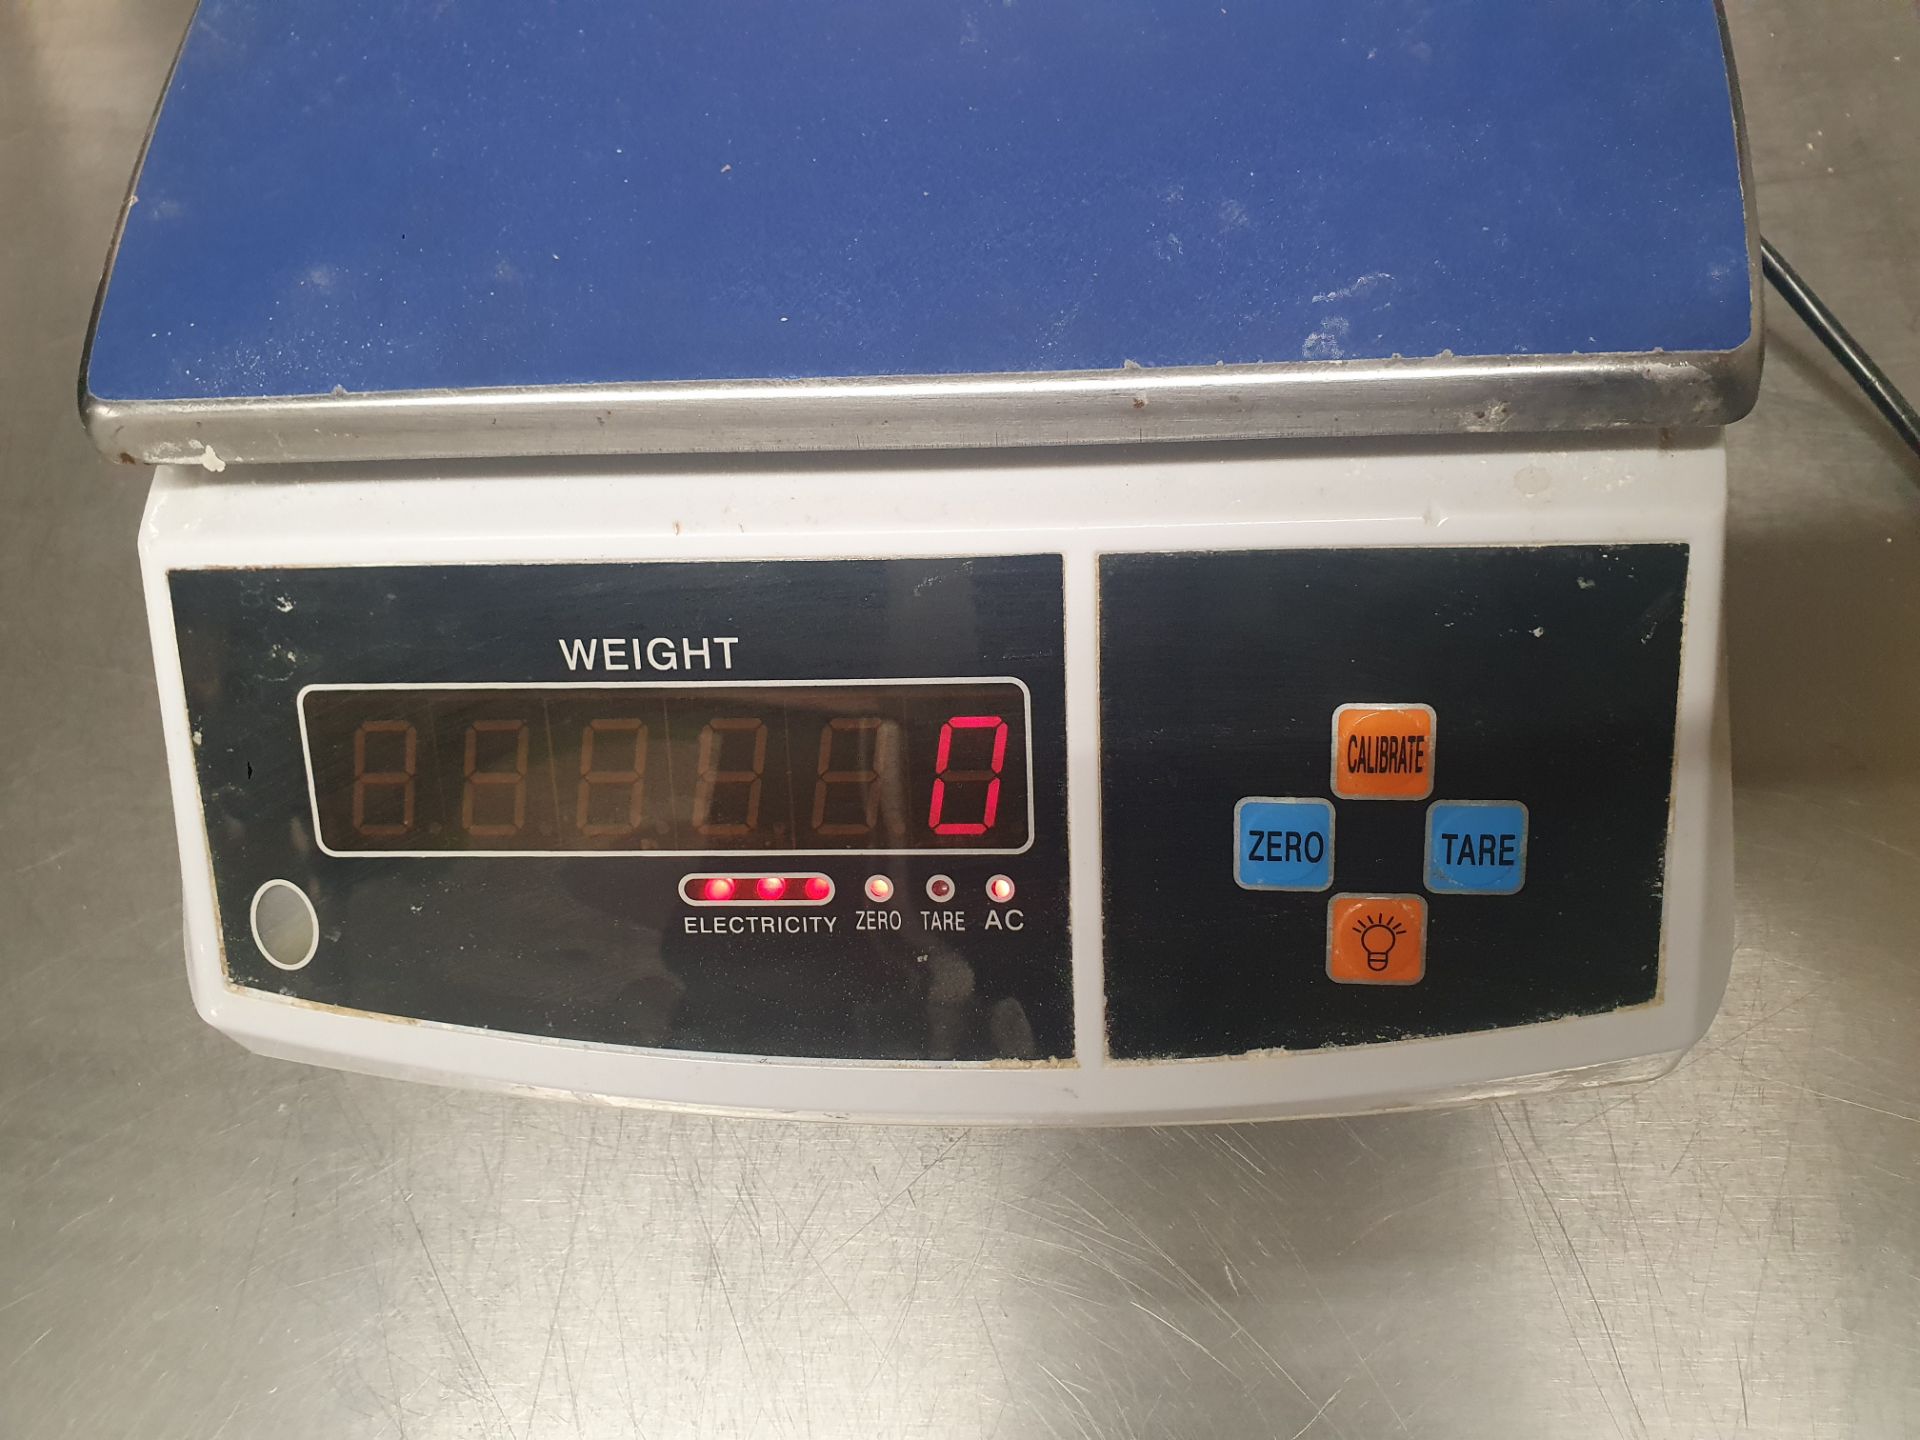 Digital Kitchen Scales. 30kgs Max. Capacity. New. Boxed - Image 4 of 9